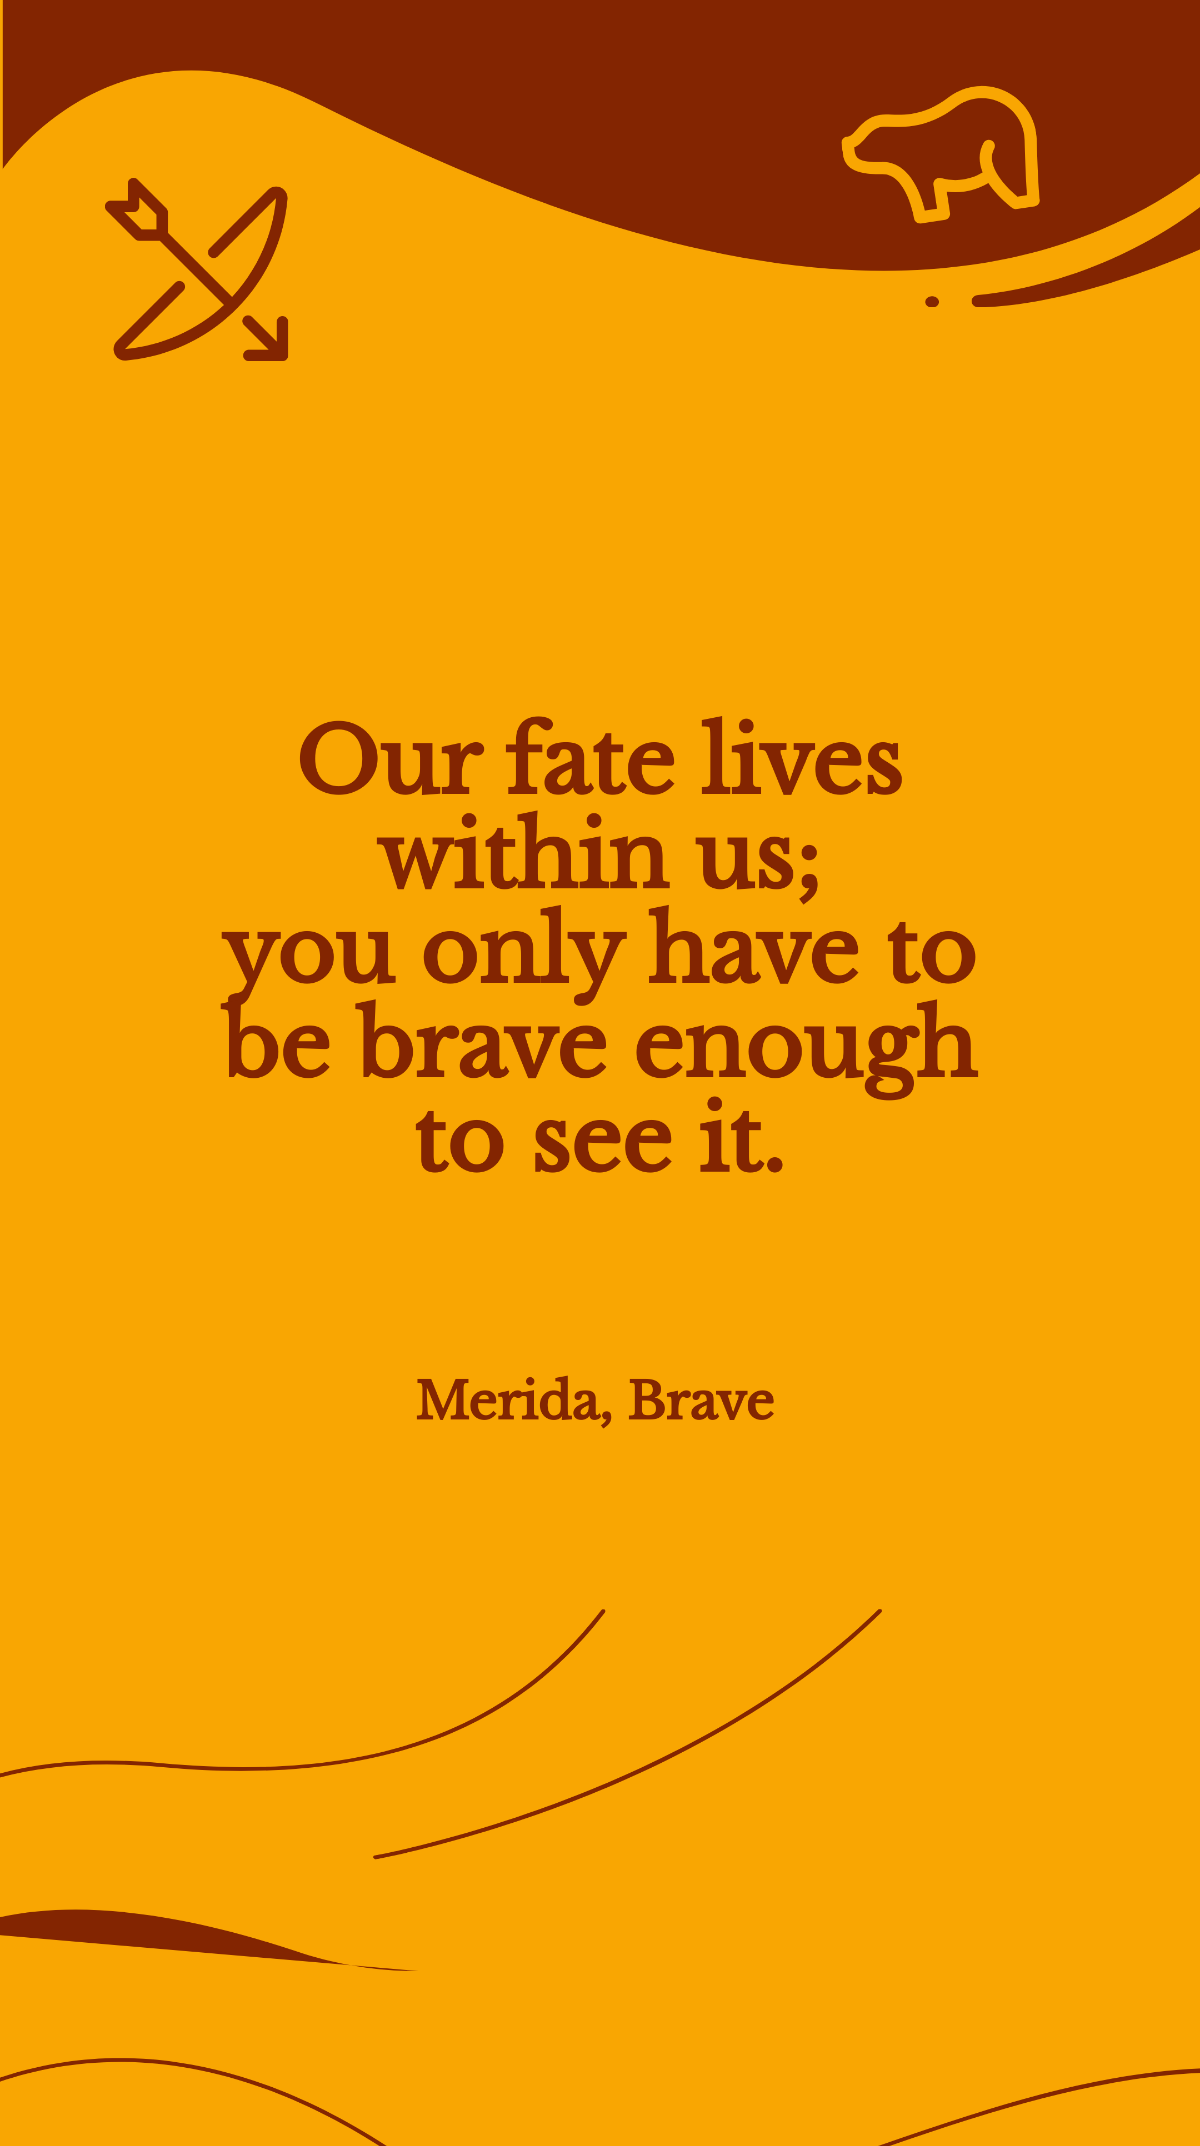 Merida, Brave - “Our fate lives within us; you only have to be brave enough to see it.”